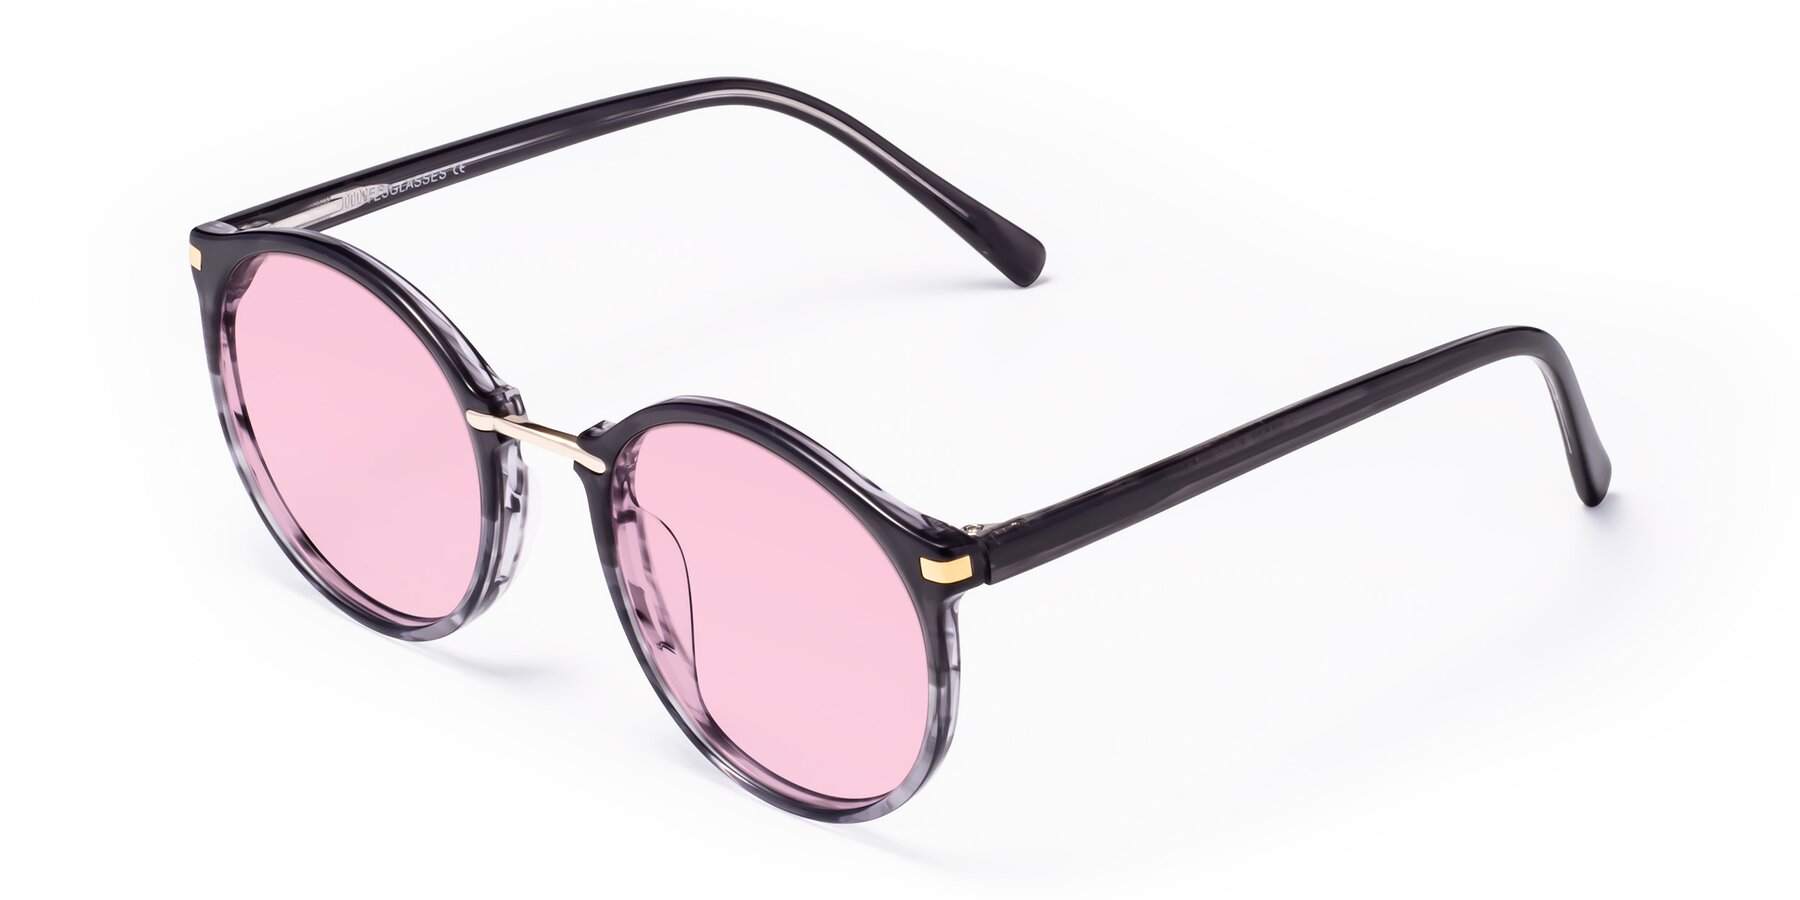 Angle of Casper in Translucent Black with Light Pink Tinted Lenses